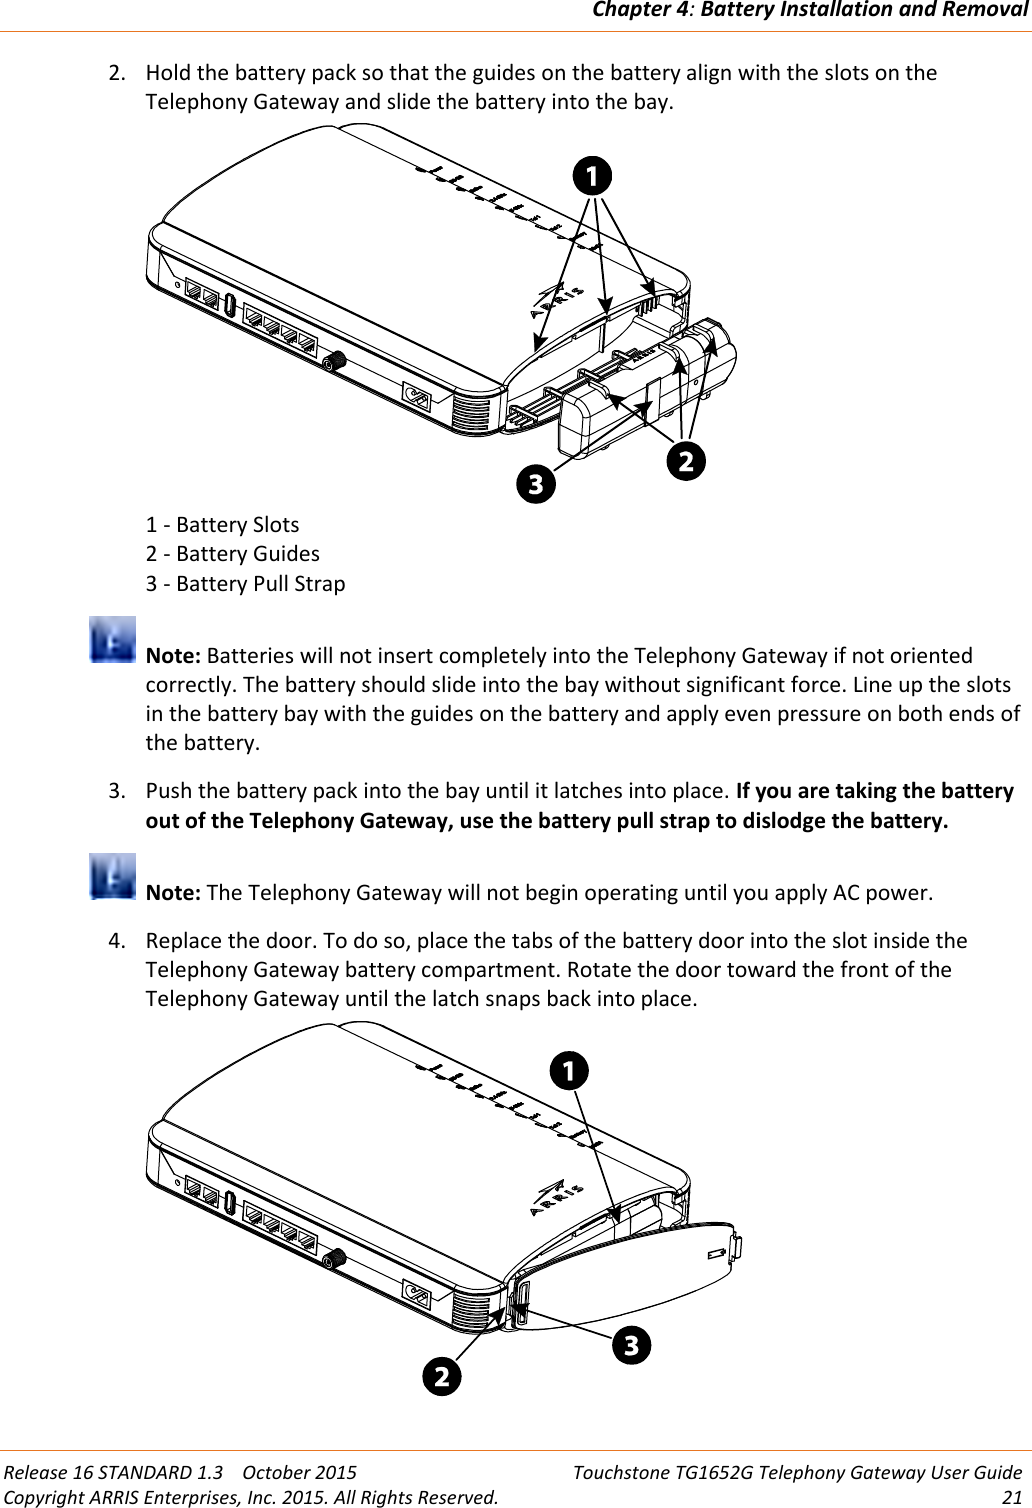 Chapter 4:Battery Installation and RemovalRelease 16 STANDARD 1.3 October 2015 Touchstone TG1652G Telephony Gateway User GuideCopyright ARRIS Enterprises, Inc. 2015. All Rights Reserved. 212. Hold the battery pack so that the guides on the battery align with the slots on theTelephony Gateway and slide the battery into the bay.1 - Battery Slots2 - Battery Guides3 - Battery Pull StrapNote: Batteries will not insert completely into the Telephony Gateway if not orientedcorrectly. The battery should slide into the bay without significant force. Line up the slotsin the battery bay with the guides on the battery and apply even pressure on both ends ofthe battery.3. Push the battery pack into the bay until it latches into place. If you are taking the batteryout of the Telephony Gateway, use the battery pull strap to dislodge the battery.Note: The Telephony Gateway will not begin operating until you apply AC power.4. Replace the door. To do so, place the tabs of the battery door into the slot inside theTelephony Gateway battery compartment. Rotate the door toward the front of theTelephony Gateway until the latch snaps back into place.